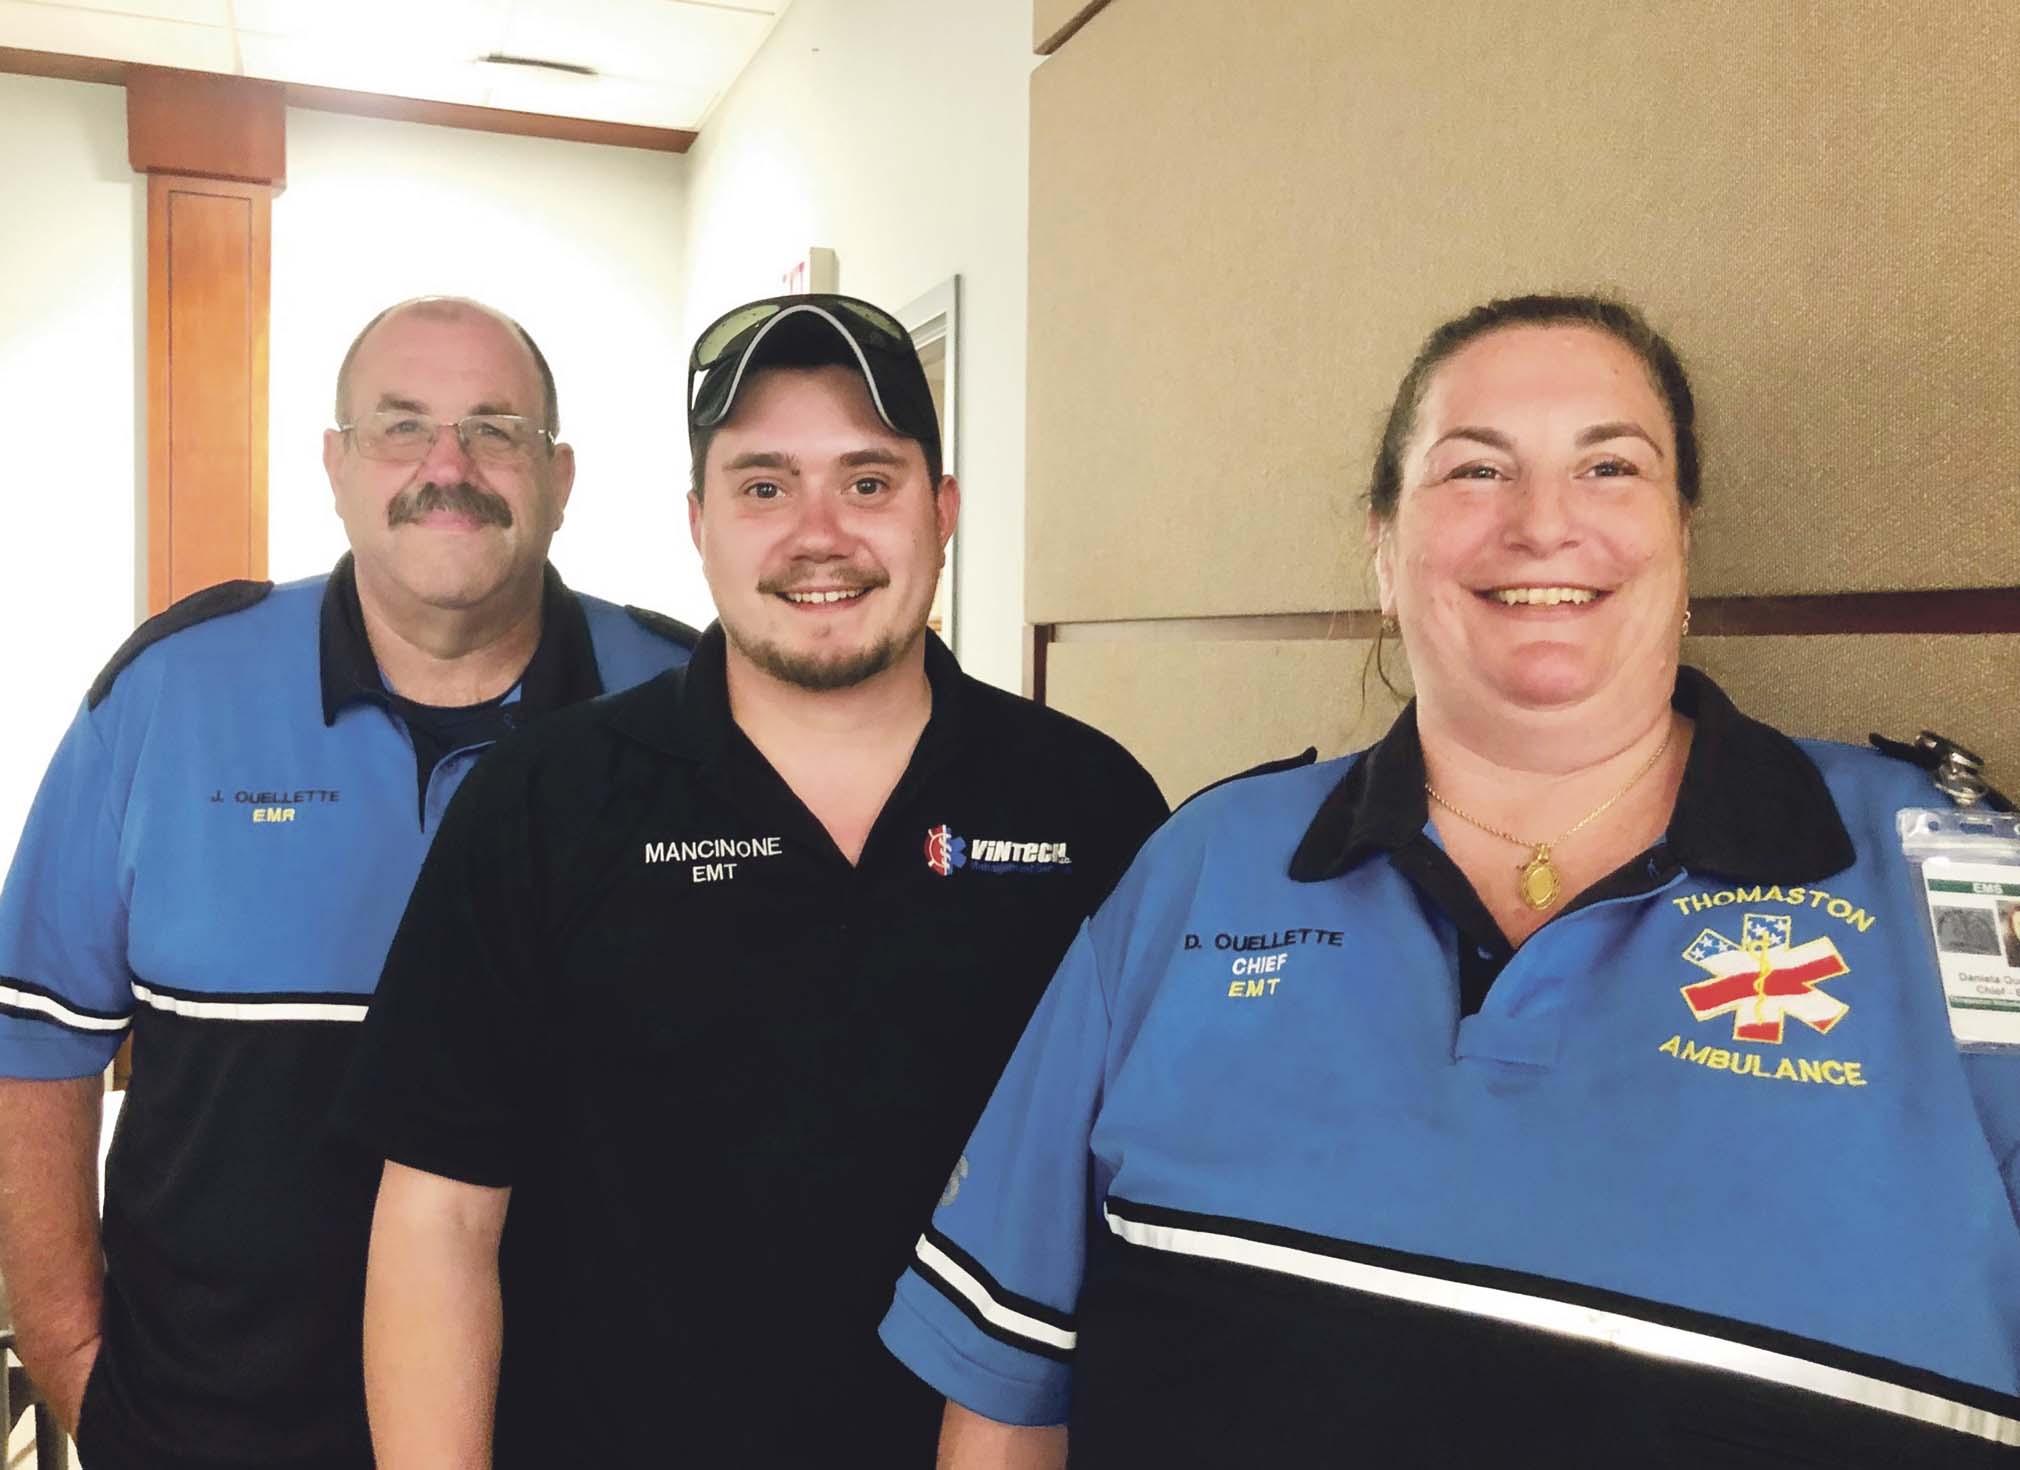 Thomaston EMTs, from left, Joe Ouellette, Tom Mancinone and Daniela Ouelette, who worked together to resuscitate a lifeless baby, are recognized by Waterbury Hospital on Wednesday night. Steve Bigham Republican-American